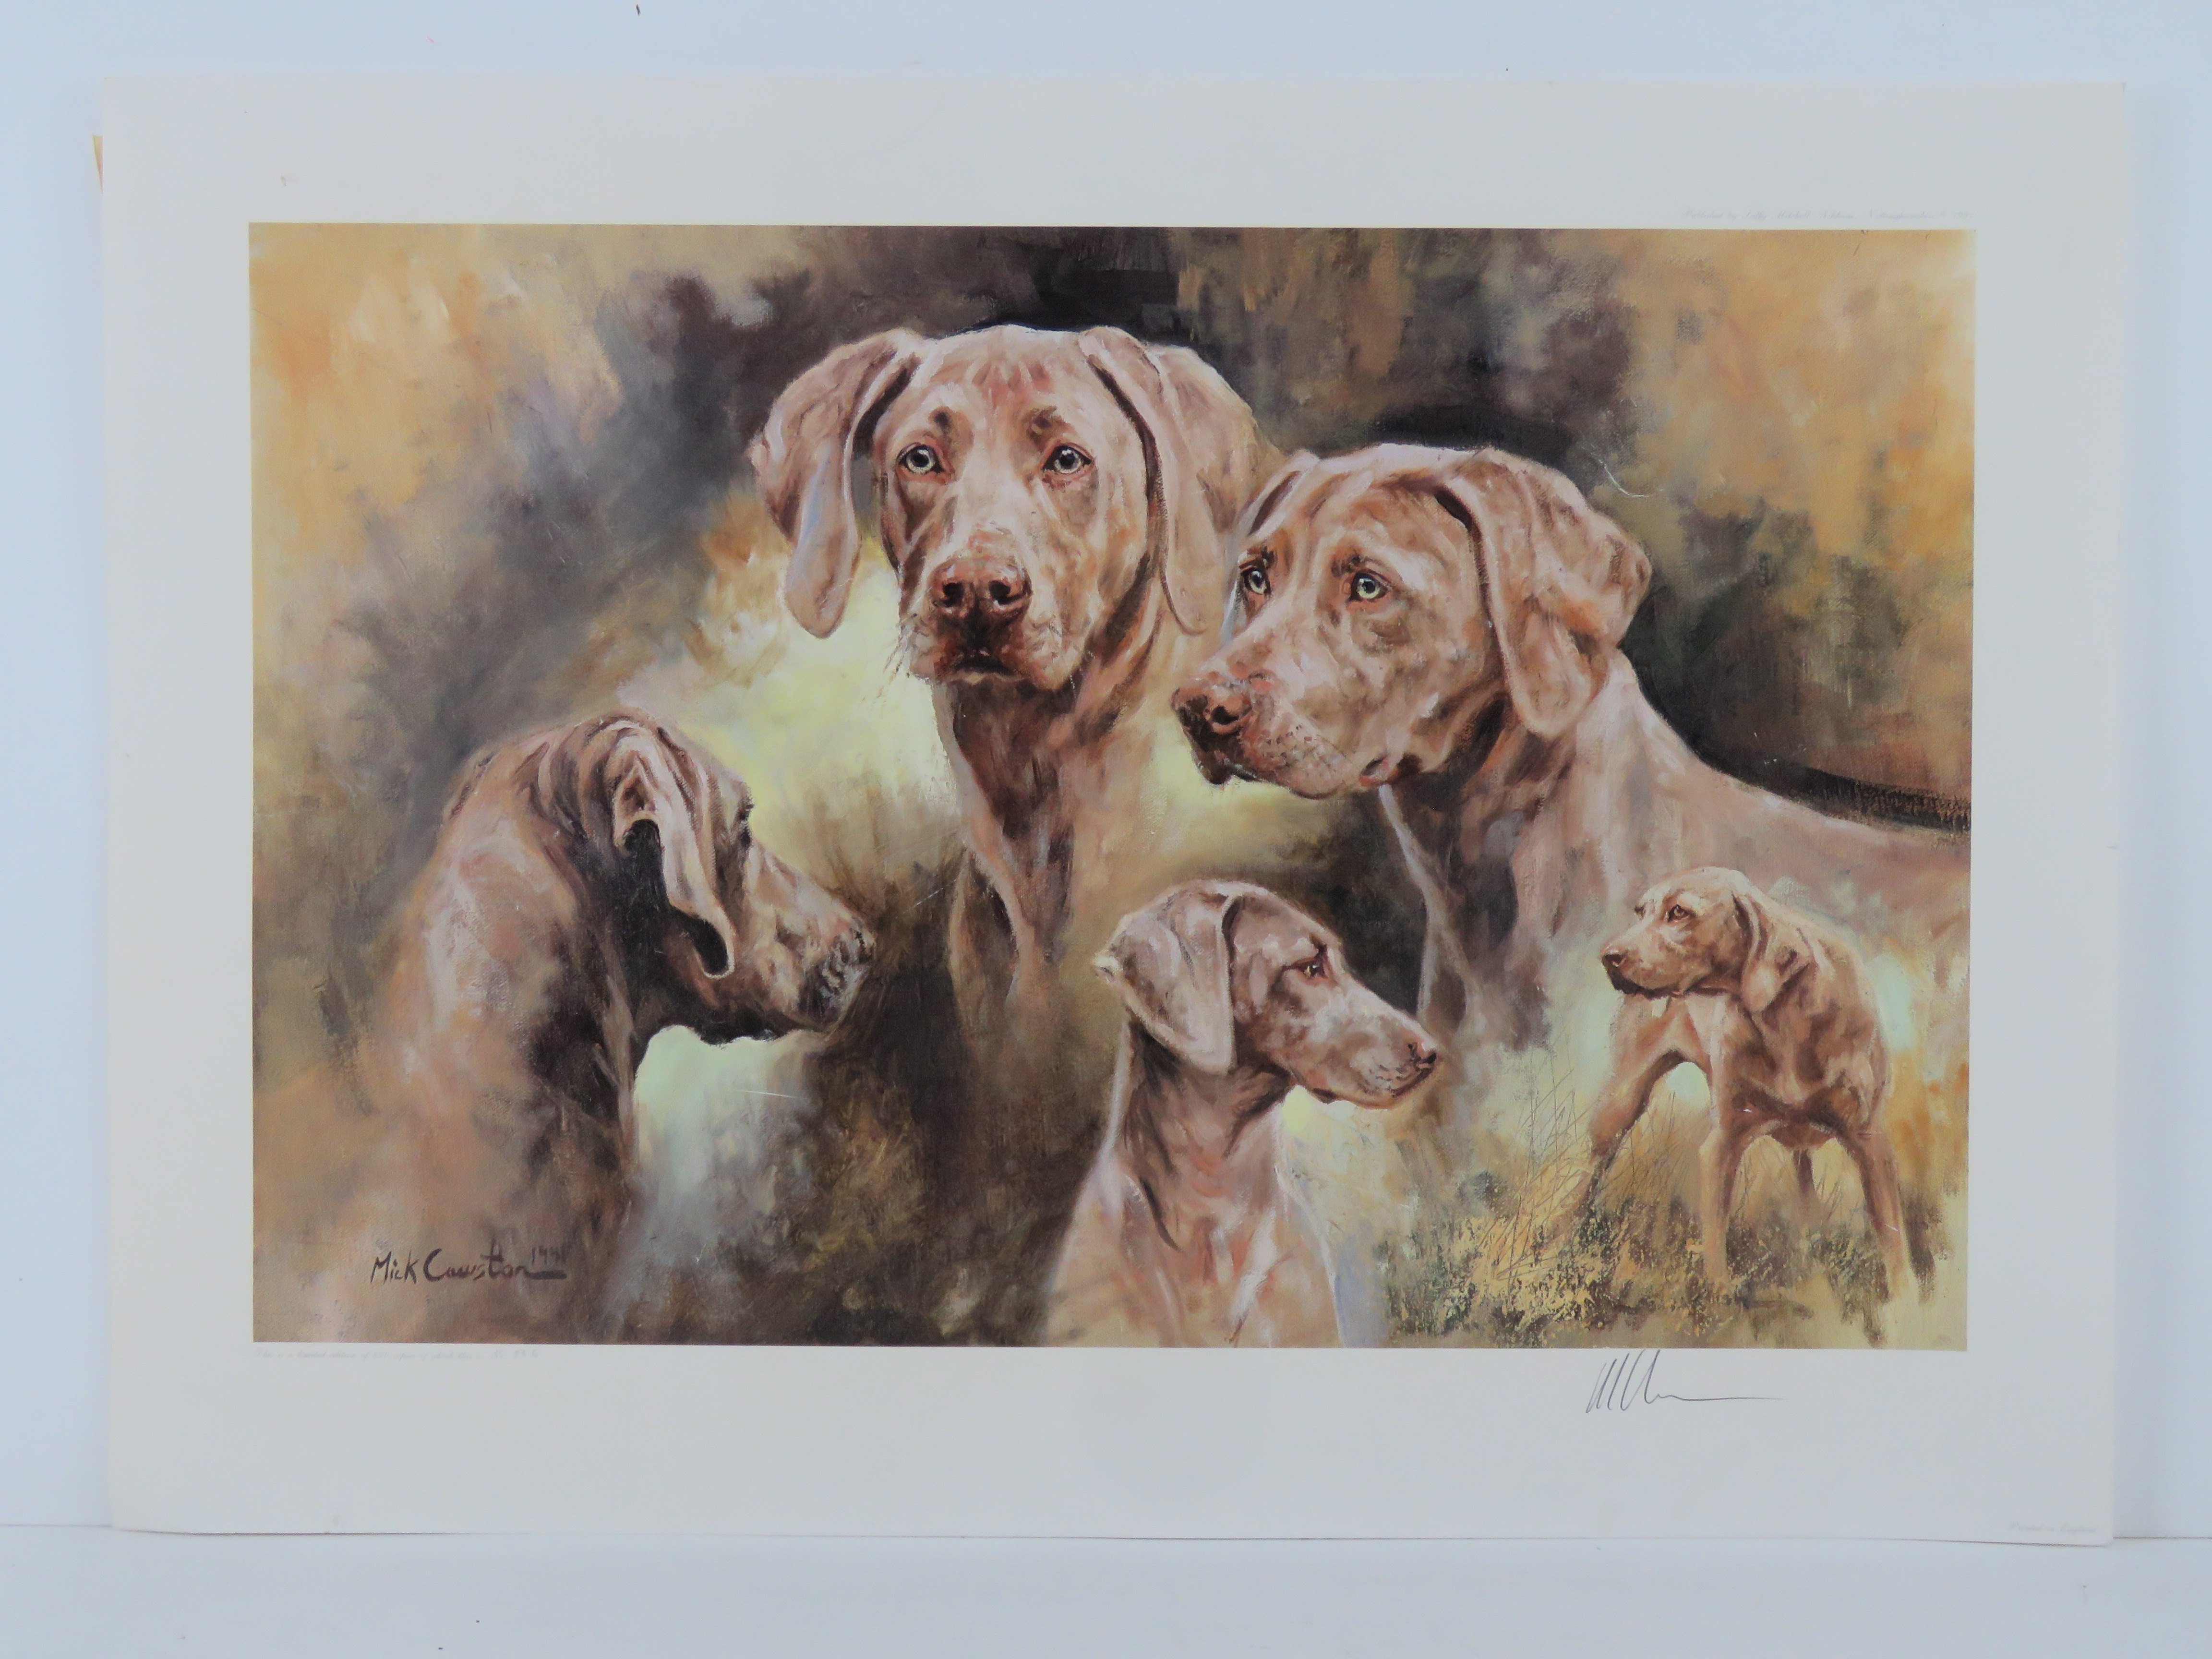 Two signed limited edition Mick Cawston prints of Weimaraners, the larger being No 566/850, - Image 2 of 7